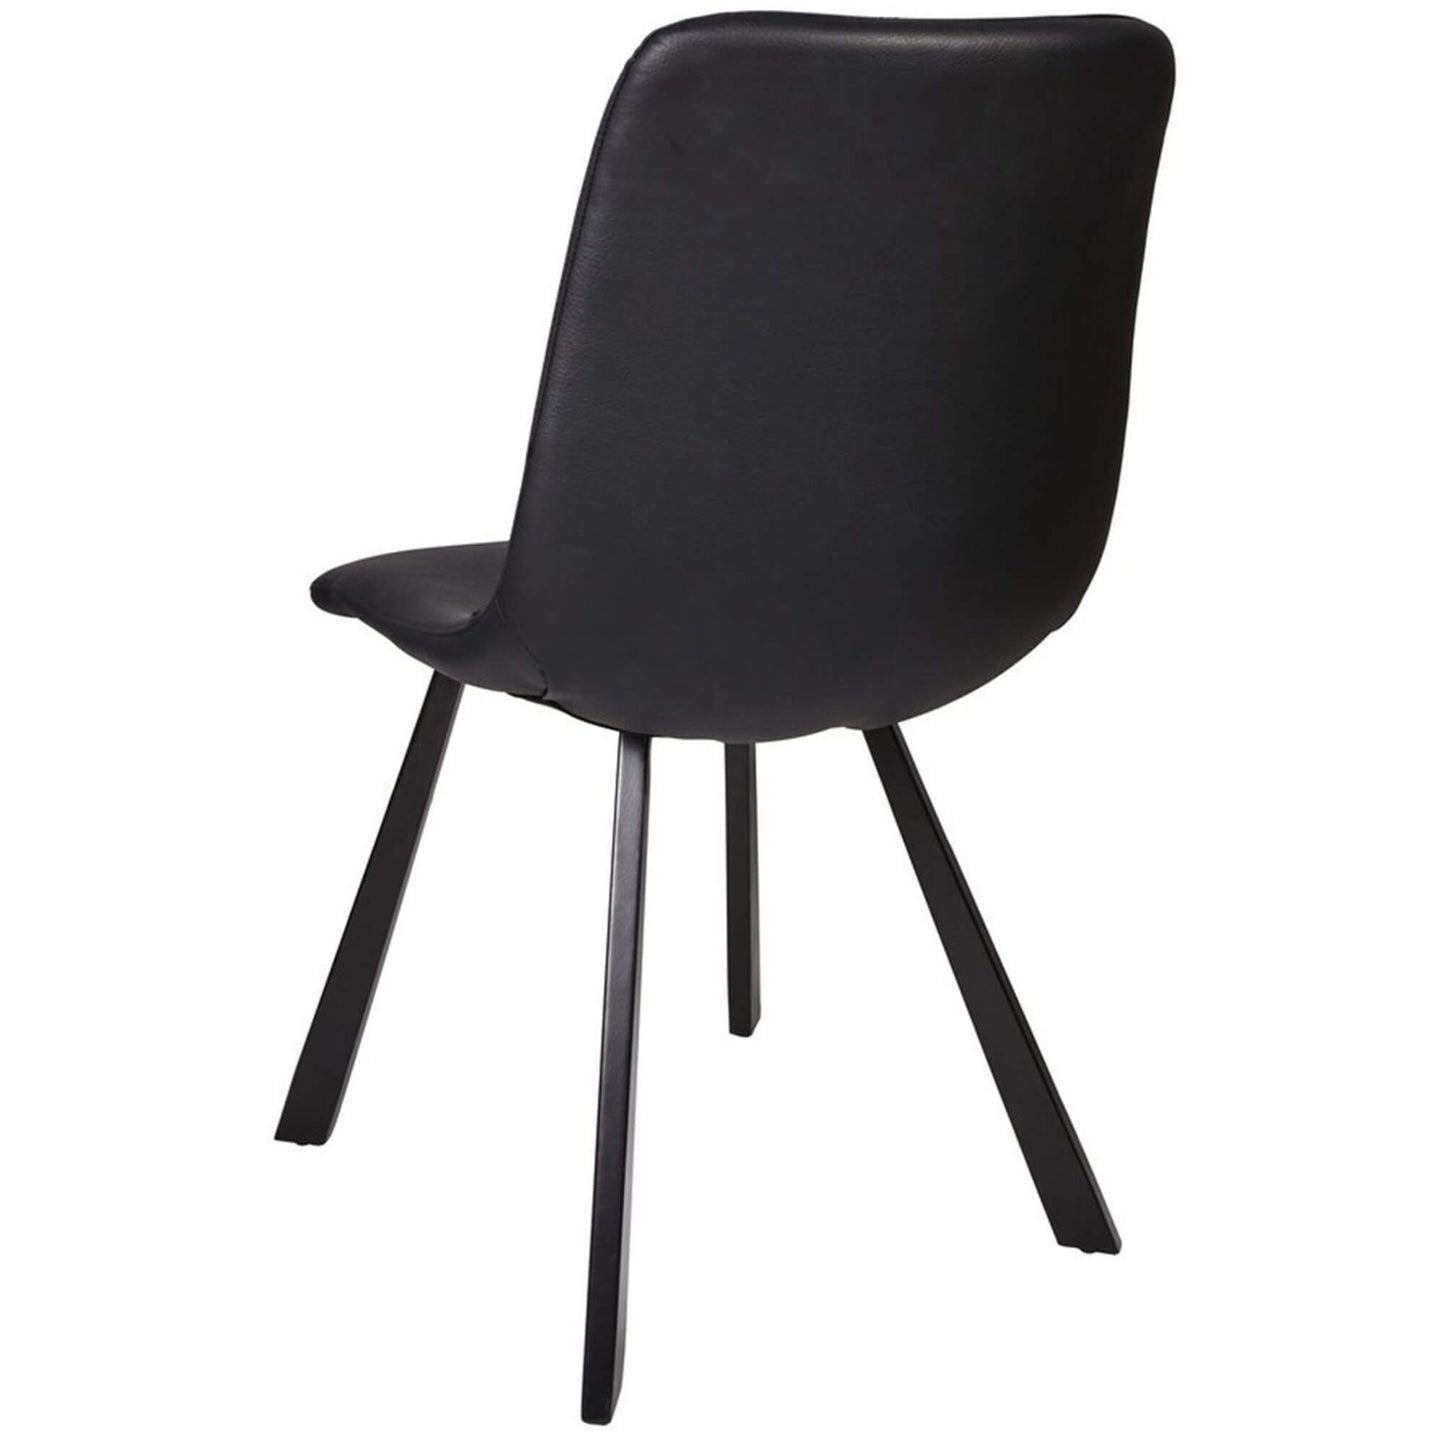 Ava | Metal Modern PU Leather Dining Chairs | Set Of 2 | Black